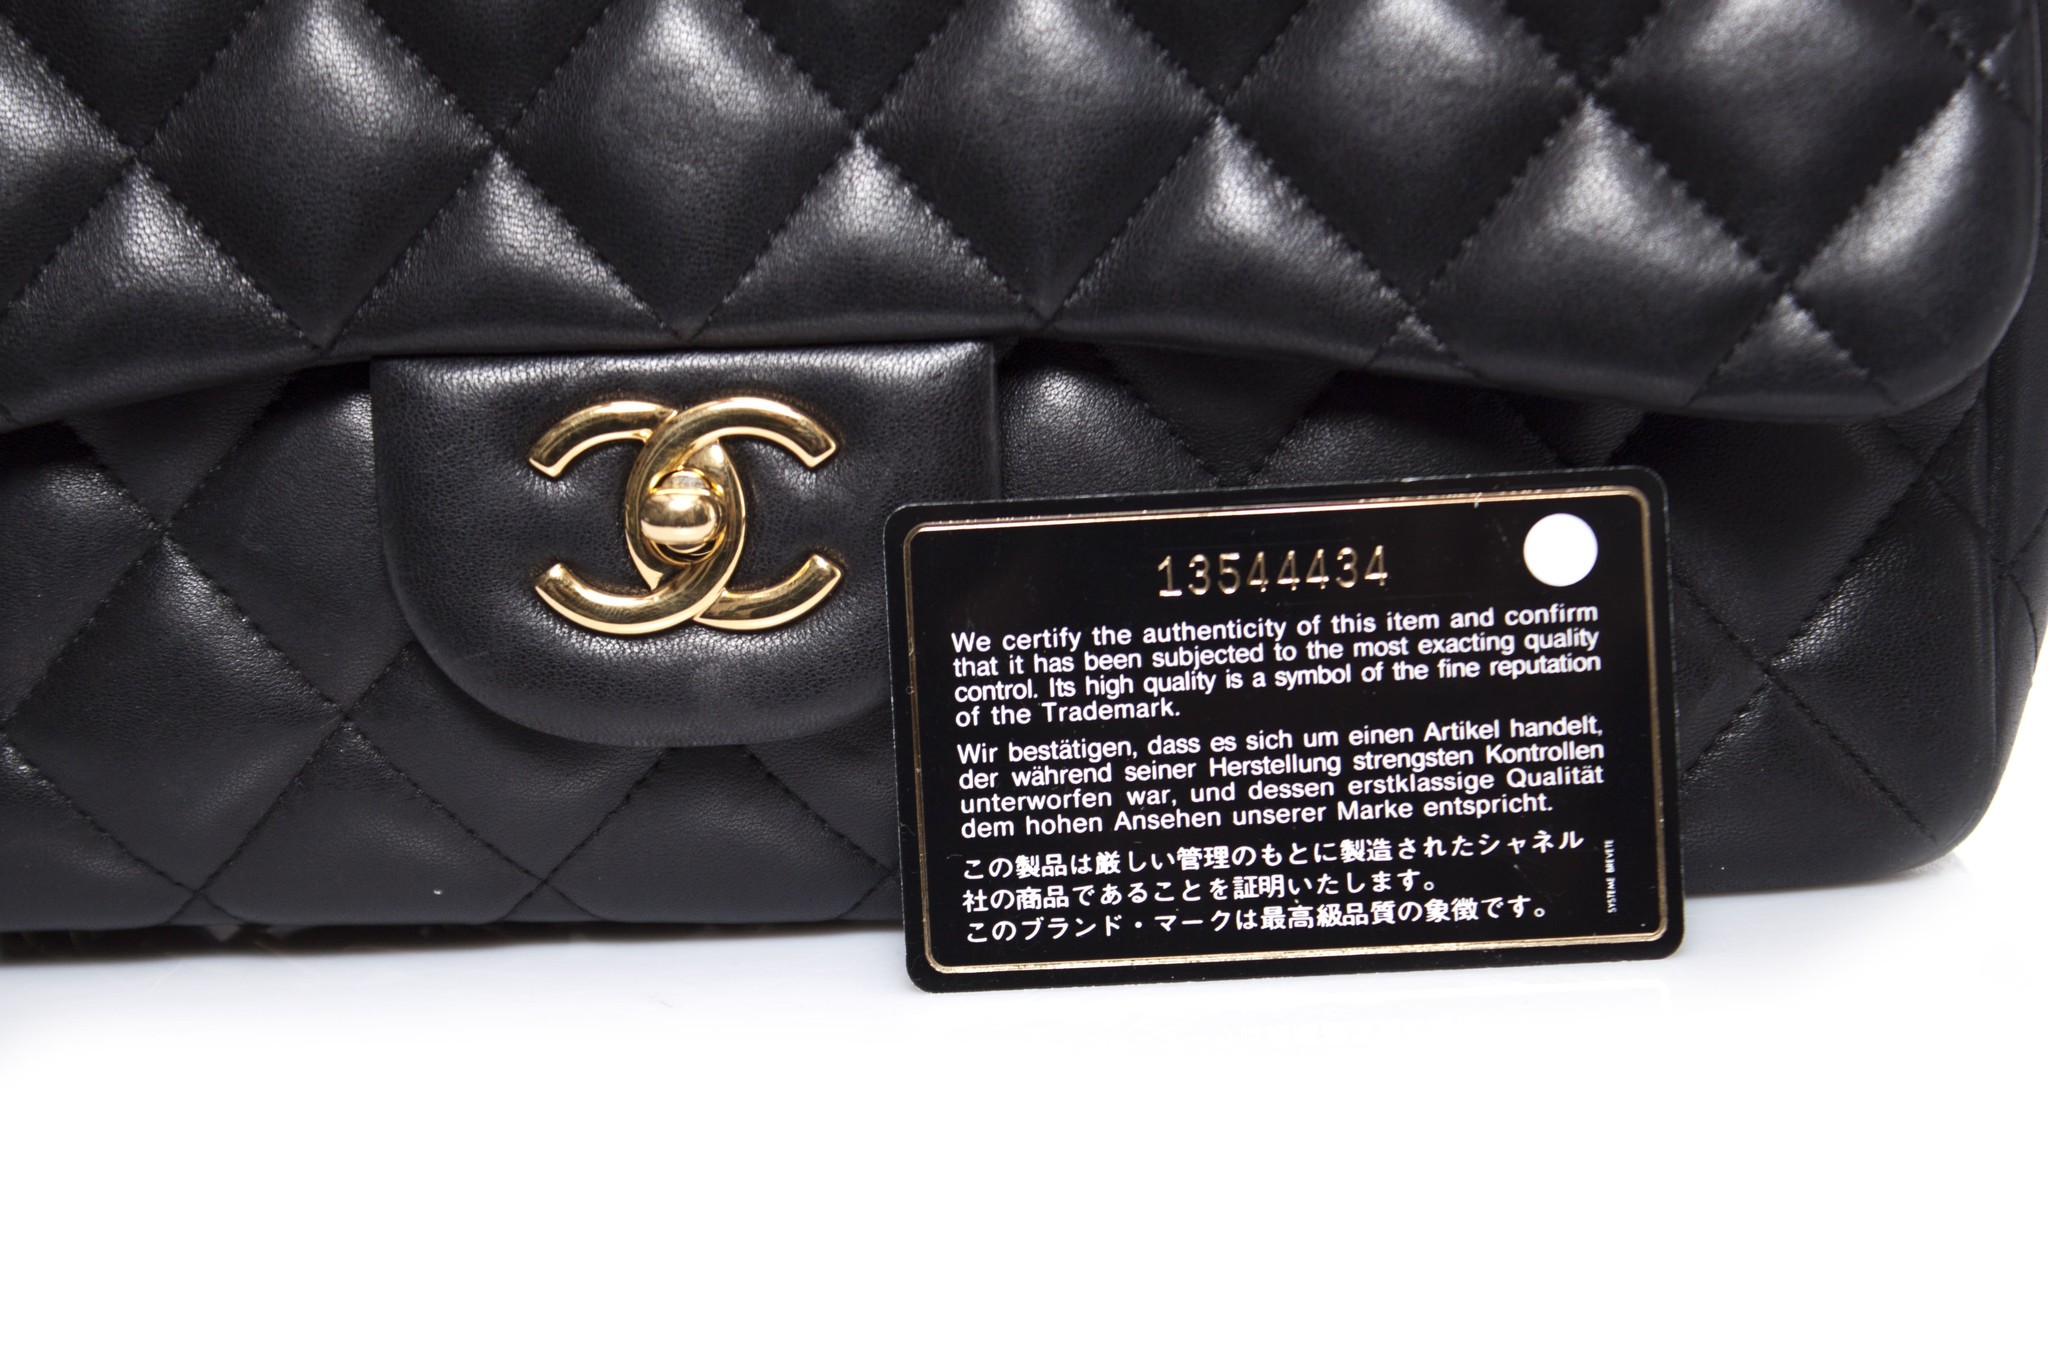 Chanel, Black Timeless Quilted Jumbo flap bag - Unique Designer Pieces